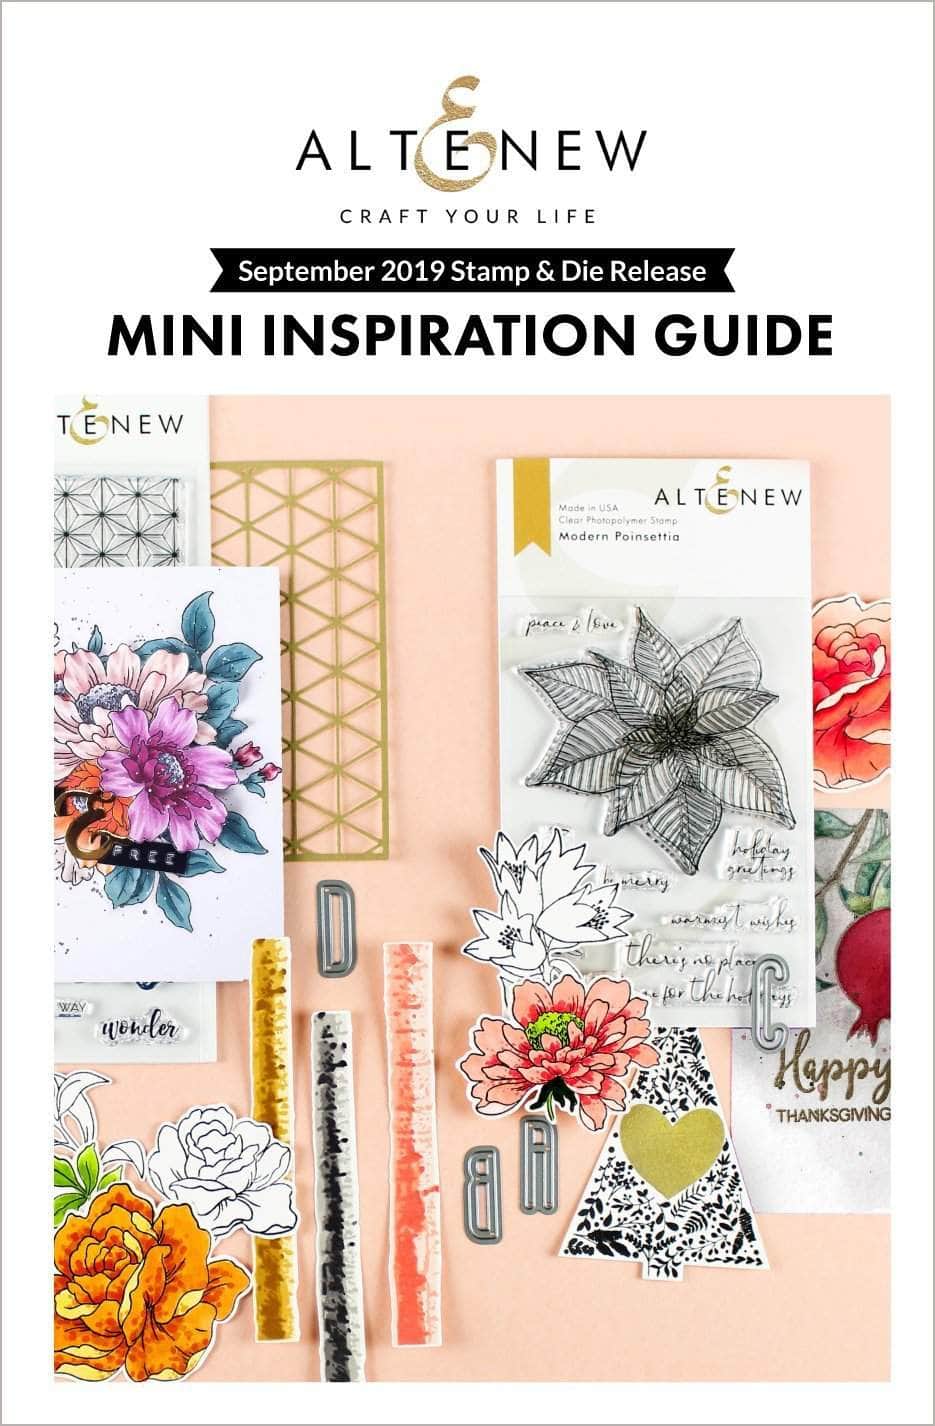 Printed Media Holiday Friendship Stamp & Die Release Mini Inspiration Guide